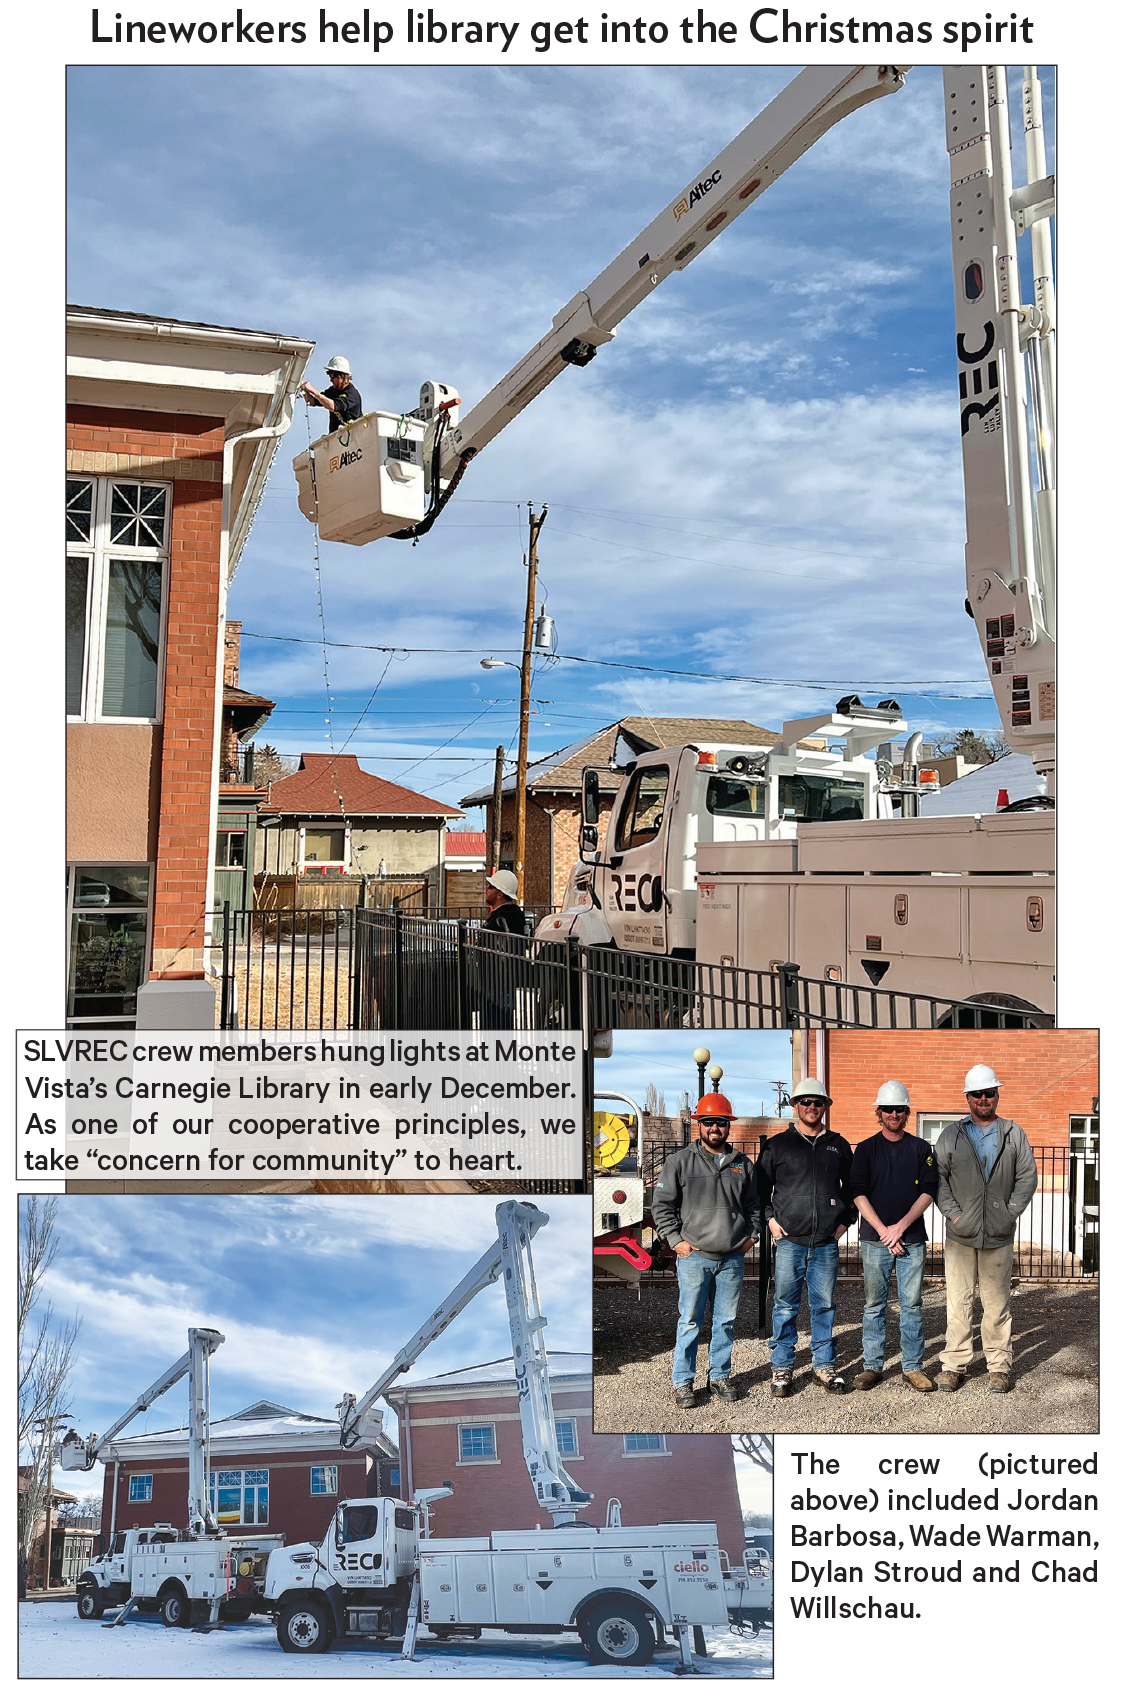 photo collage of lineworkers hanging lights